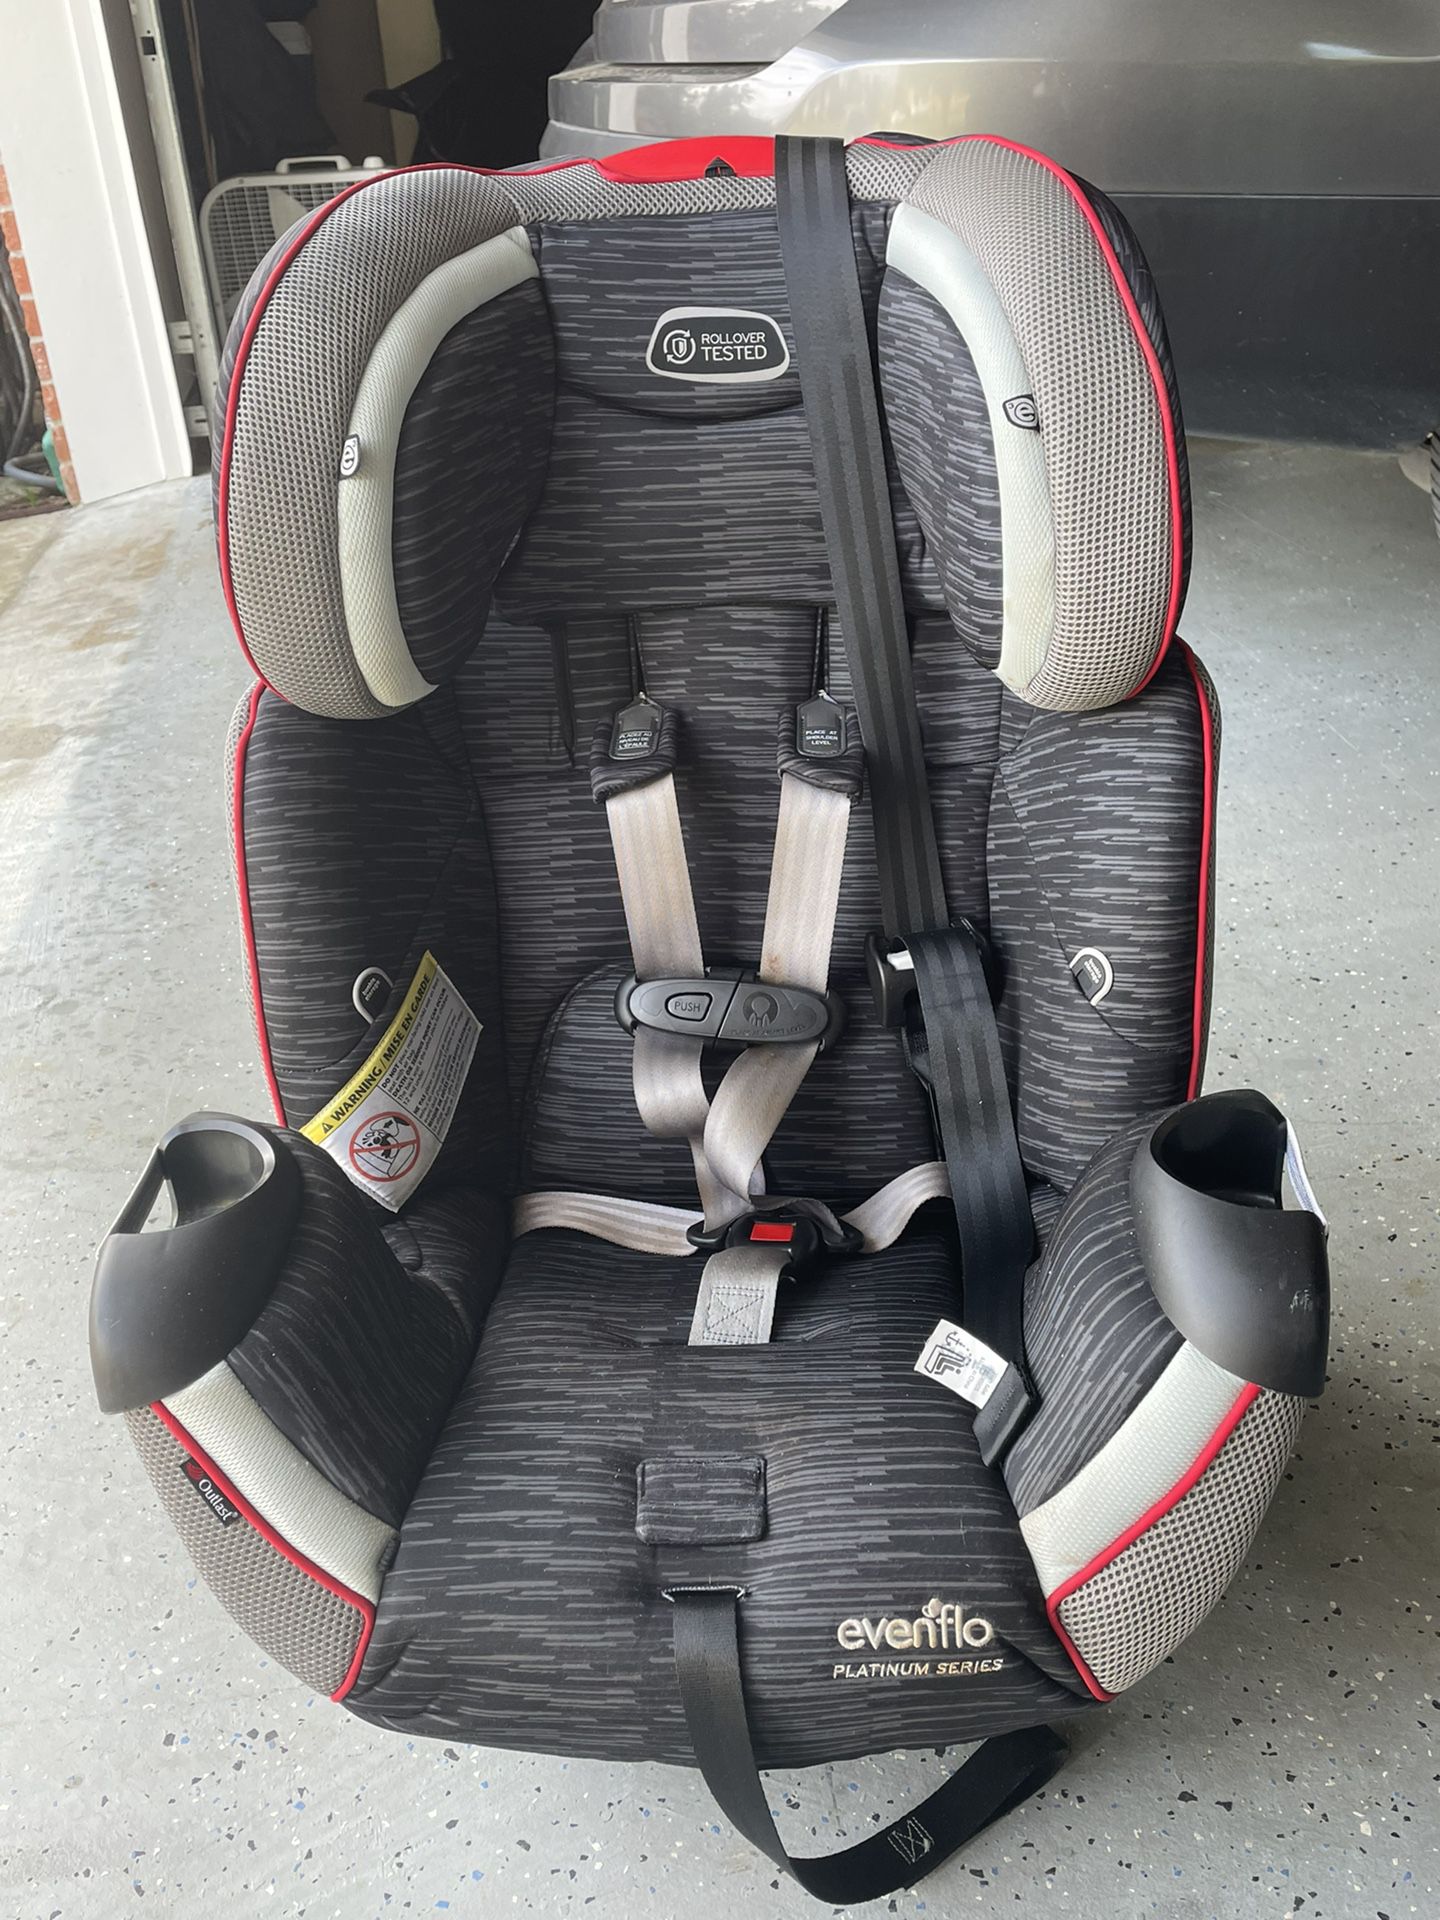 Evenflo Car Seats All In One  Have Two Expiration Dat 2025 